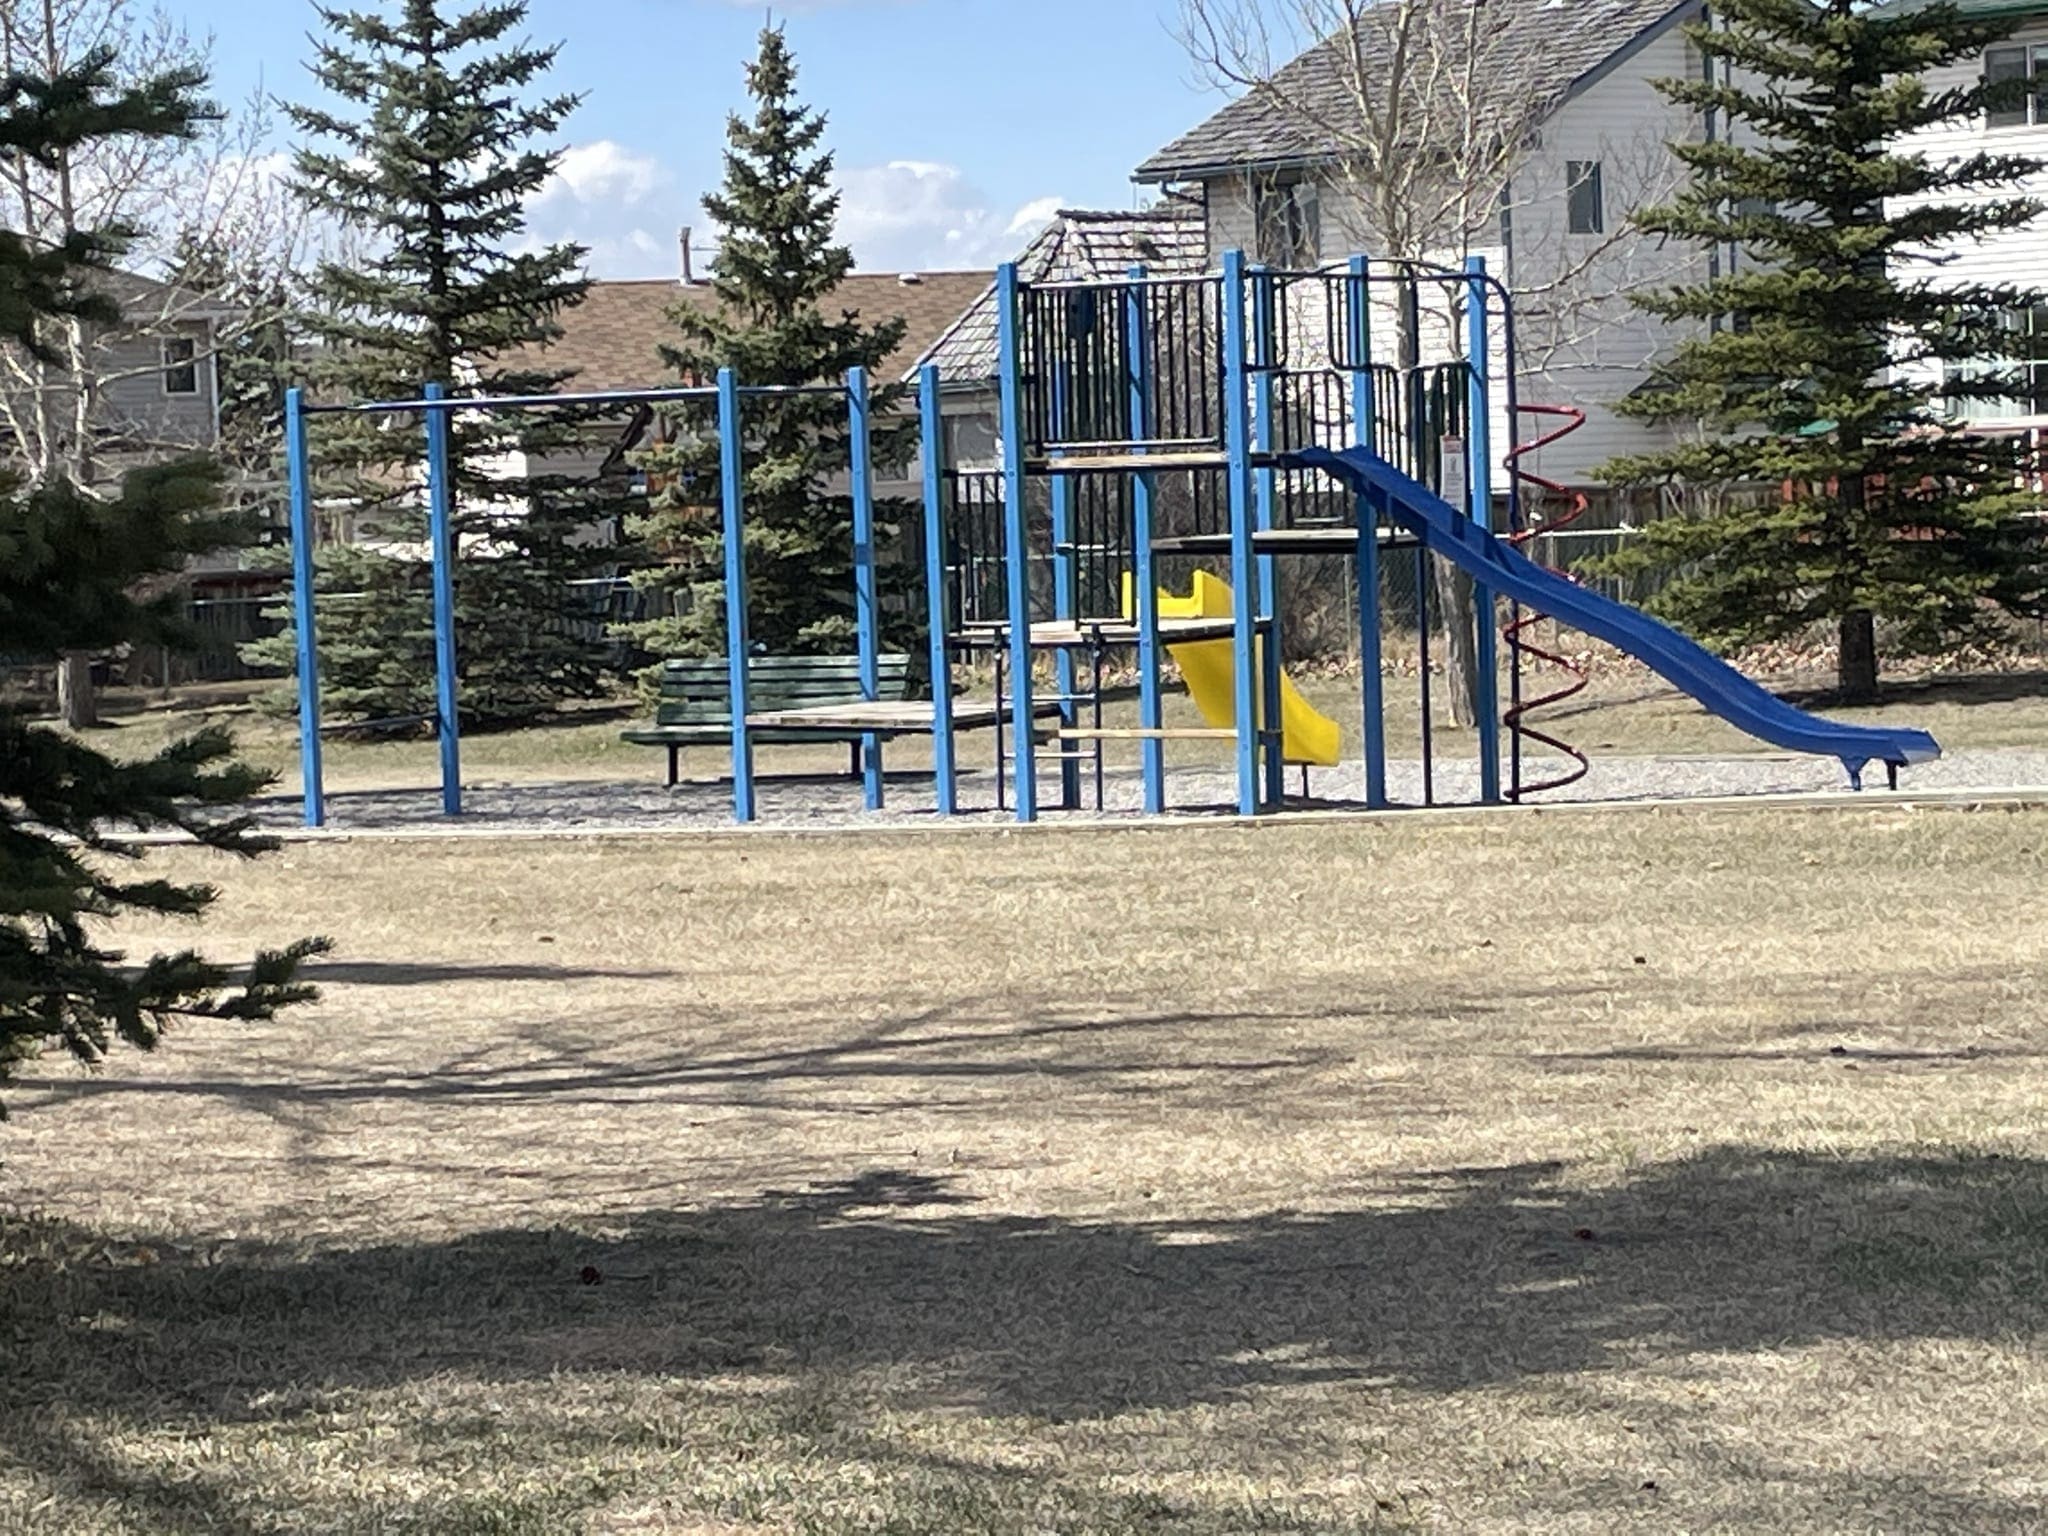 West Terrace Rise Playground